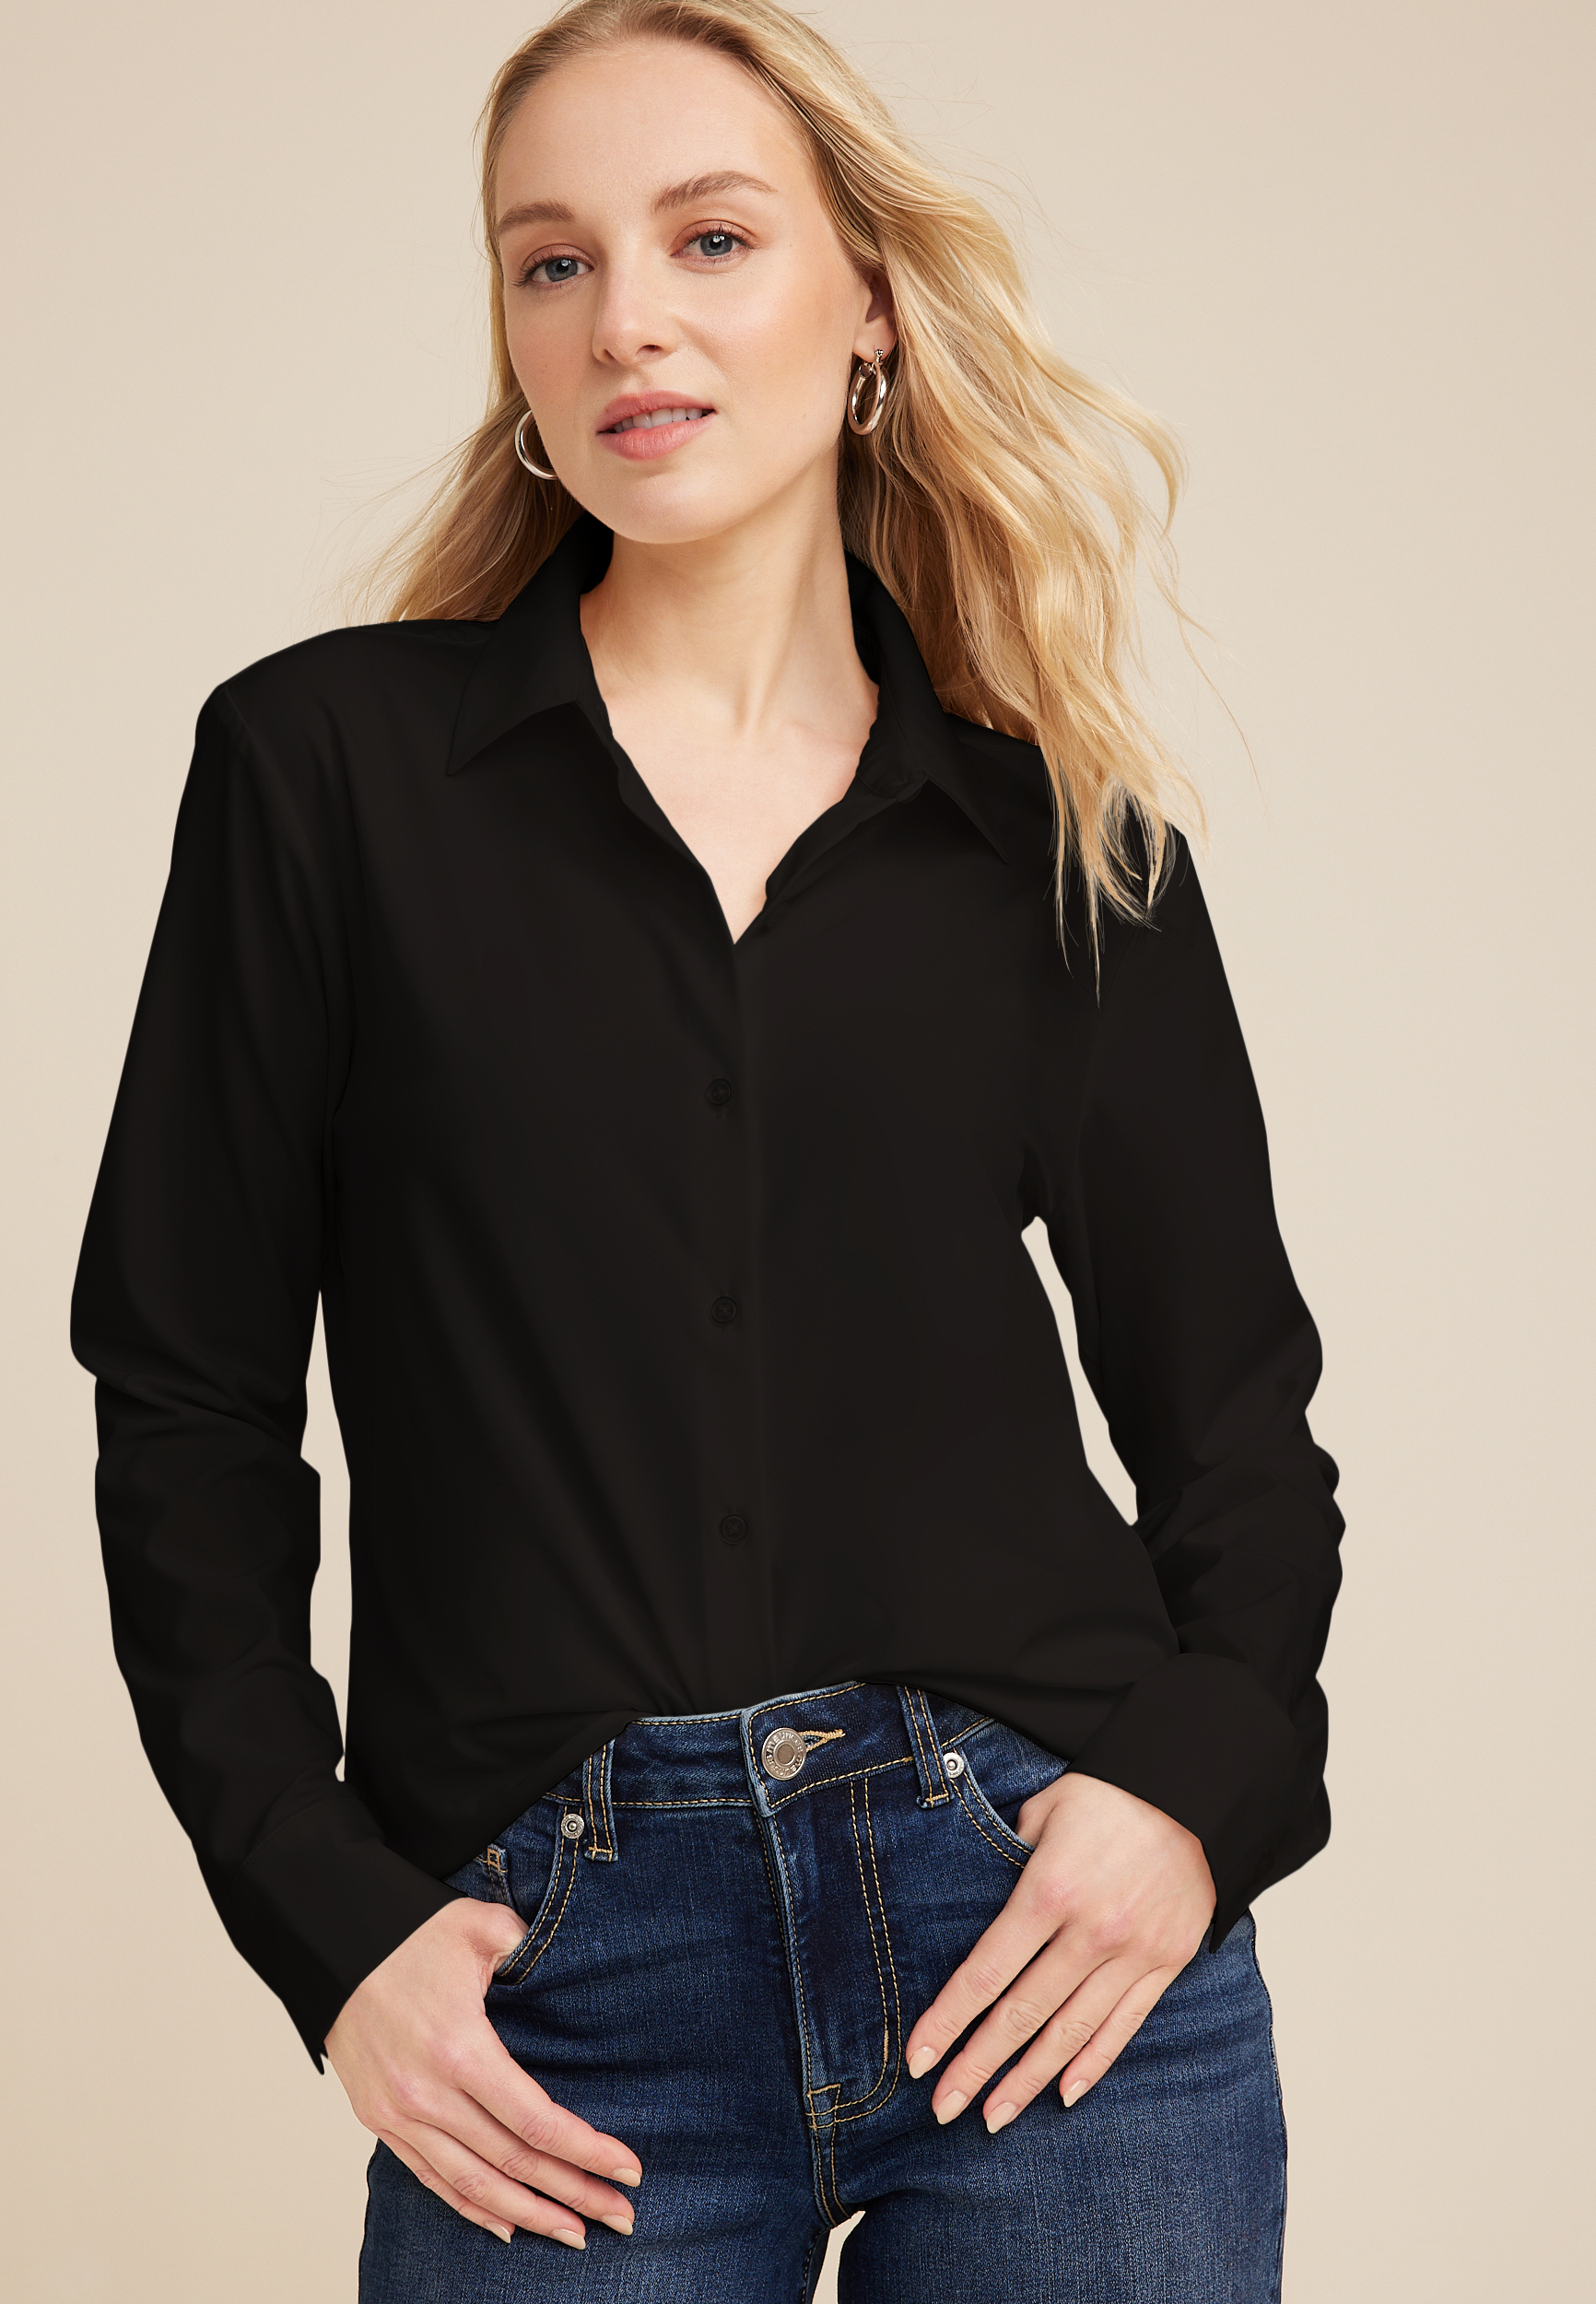 Women's Shirts & Blouses: Flowy, Floral, Peasant & More | maurices